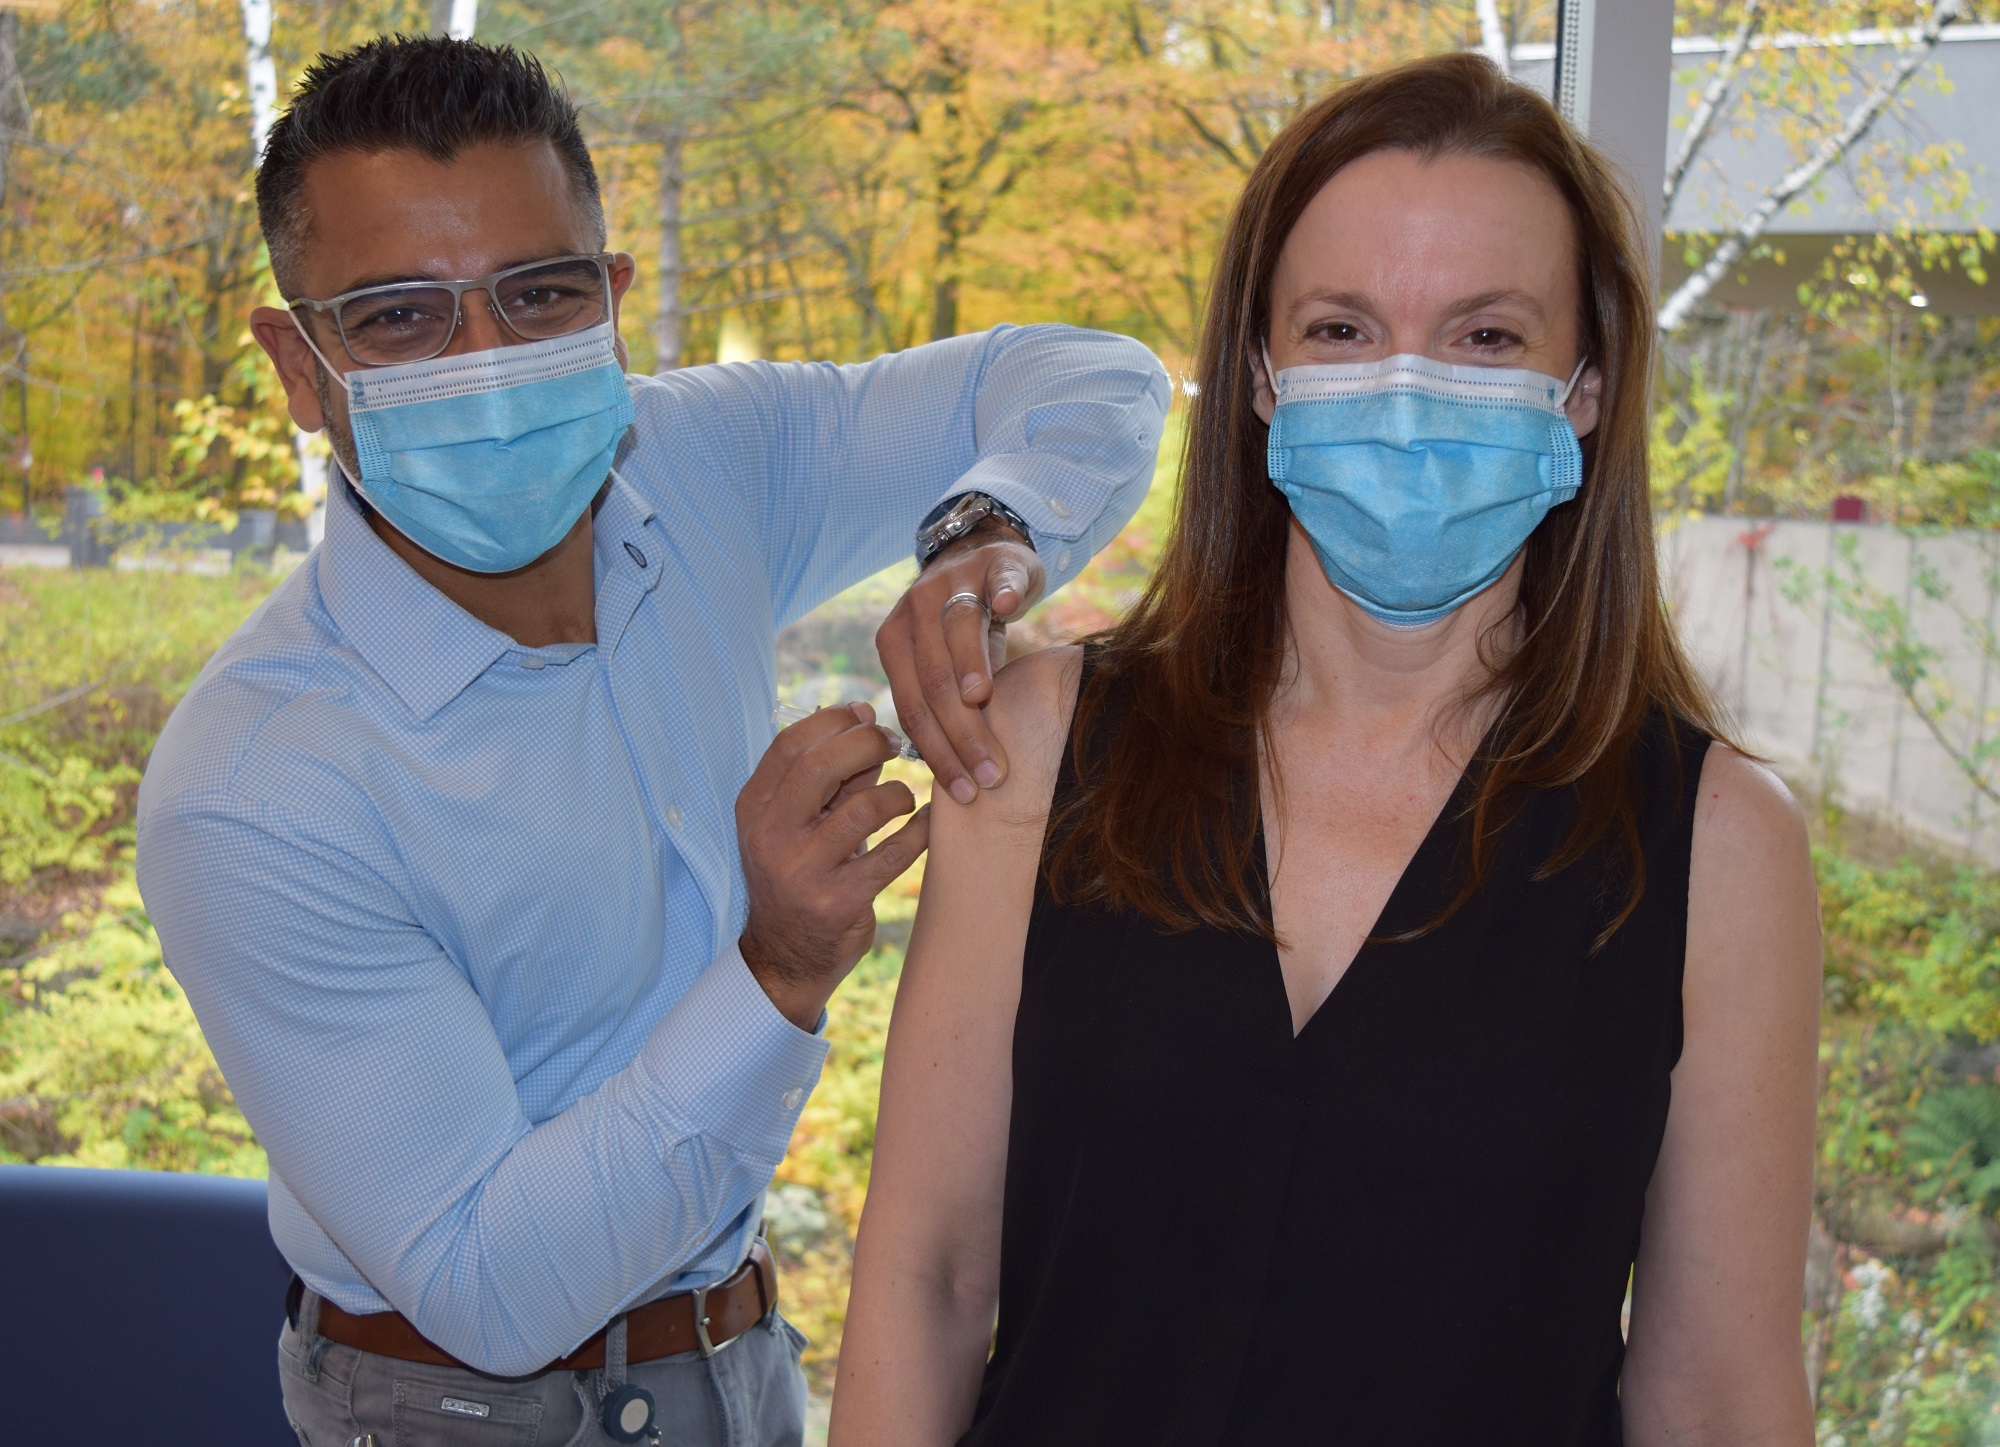 Doctor wearing a mask gives a flu shot to a woman who is also in a mask.